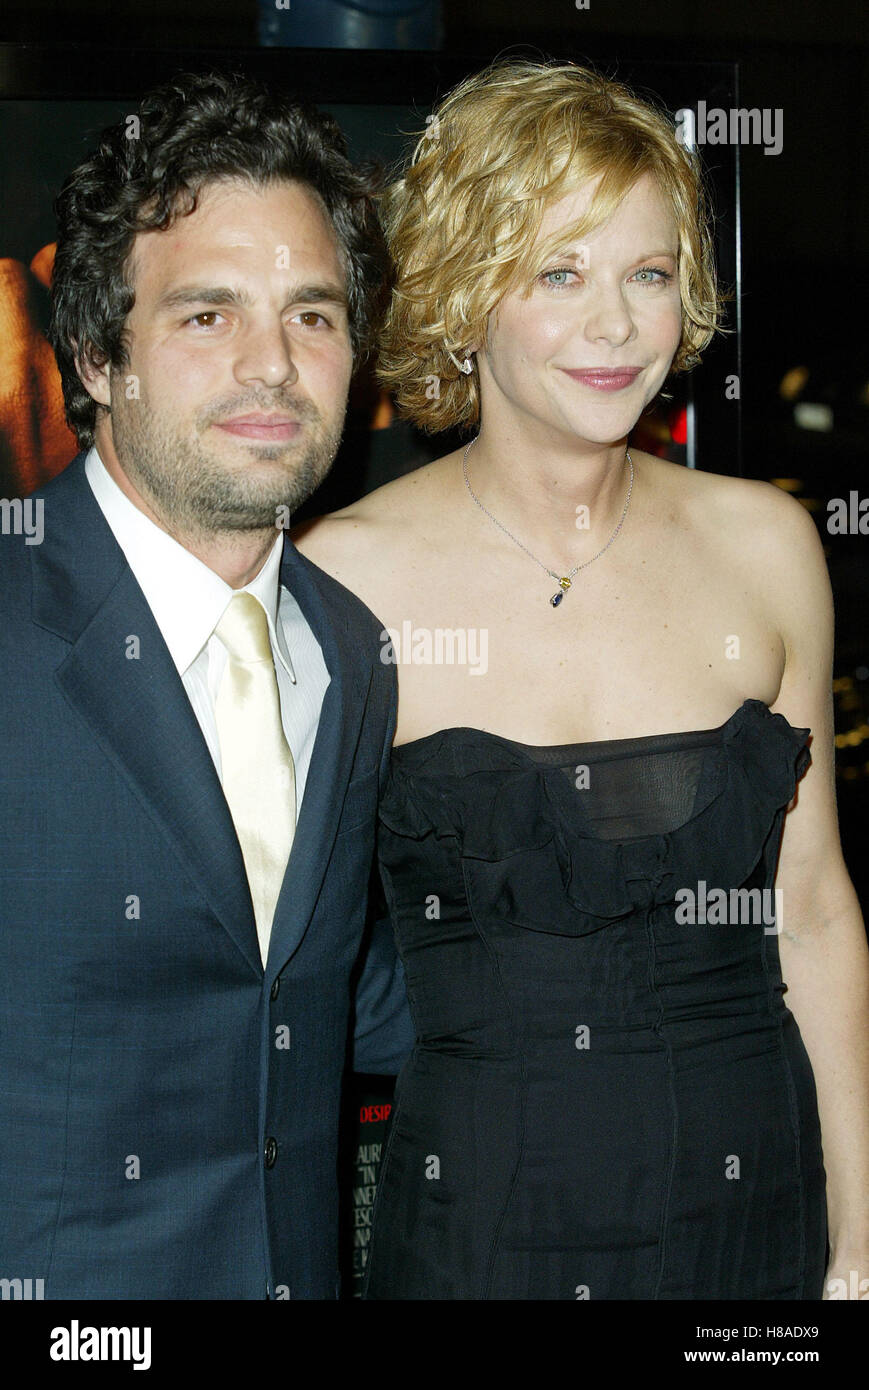 MARK RUFFALO & MEG RYAN IN THE CUT  LA FILM PREMIERE ACADEMY OF MOTION PICTURES BEVERLY HILLS LA USA 16 October 2003 Stock Photo